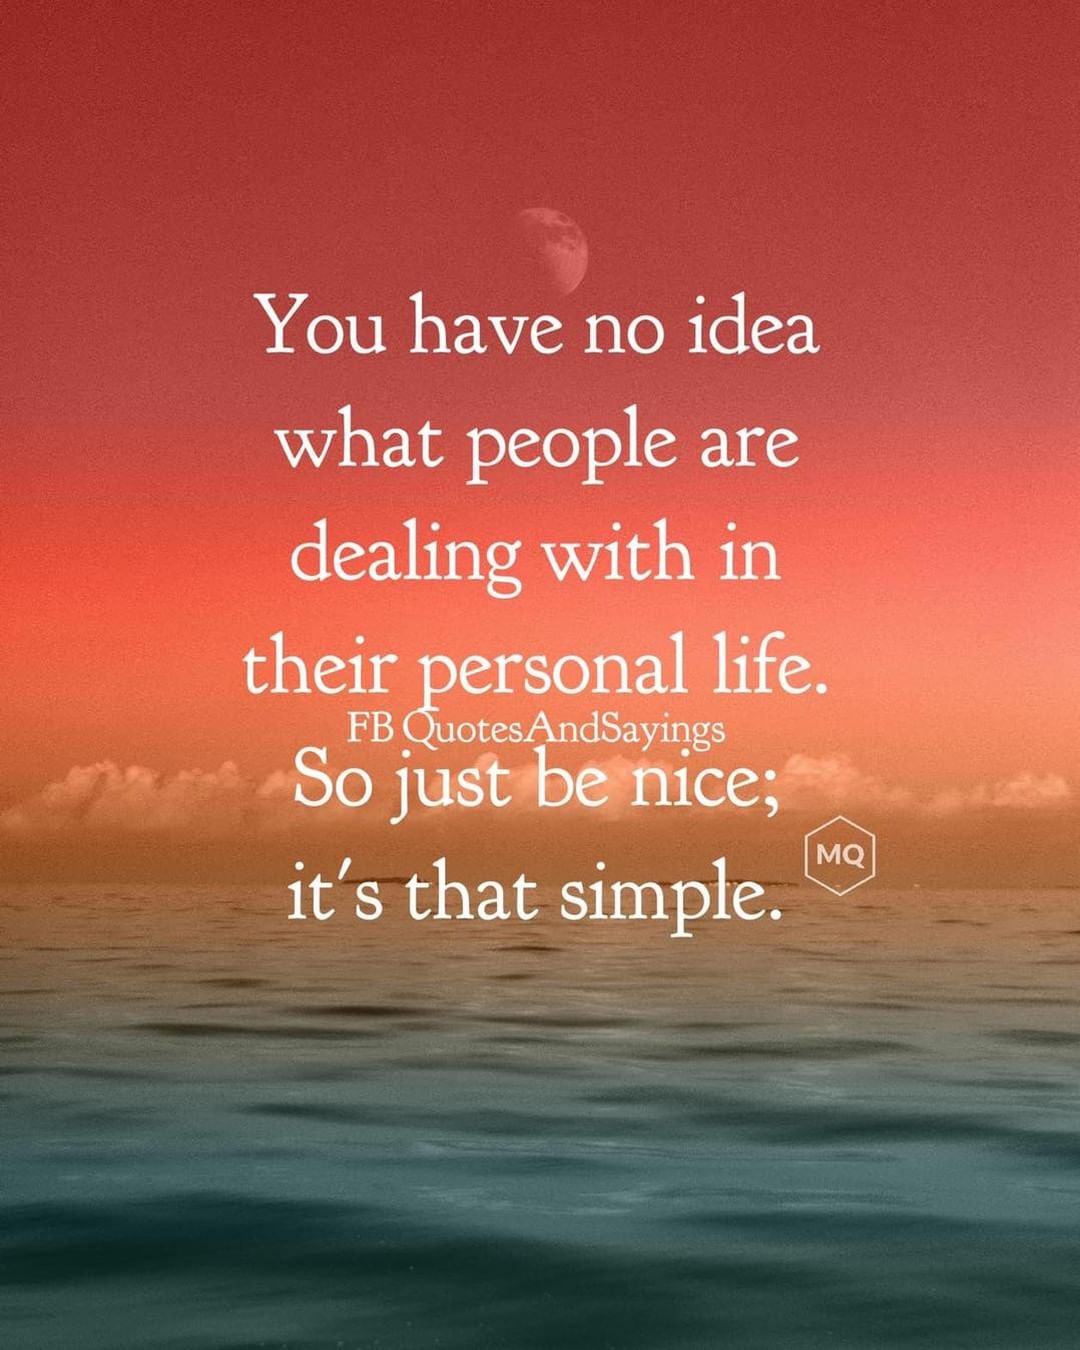 You have no idea what people are dealing with in their personal life. So just be nice, it's that simple.